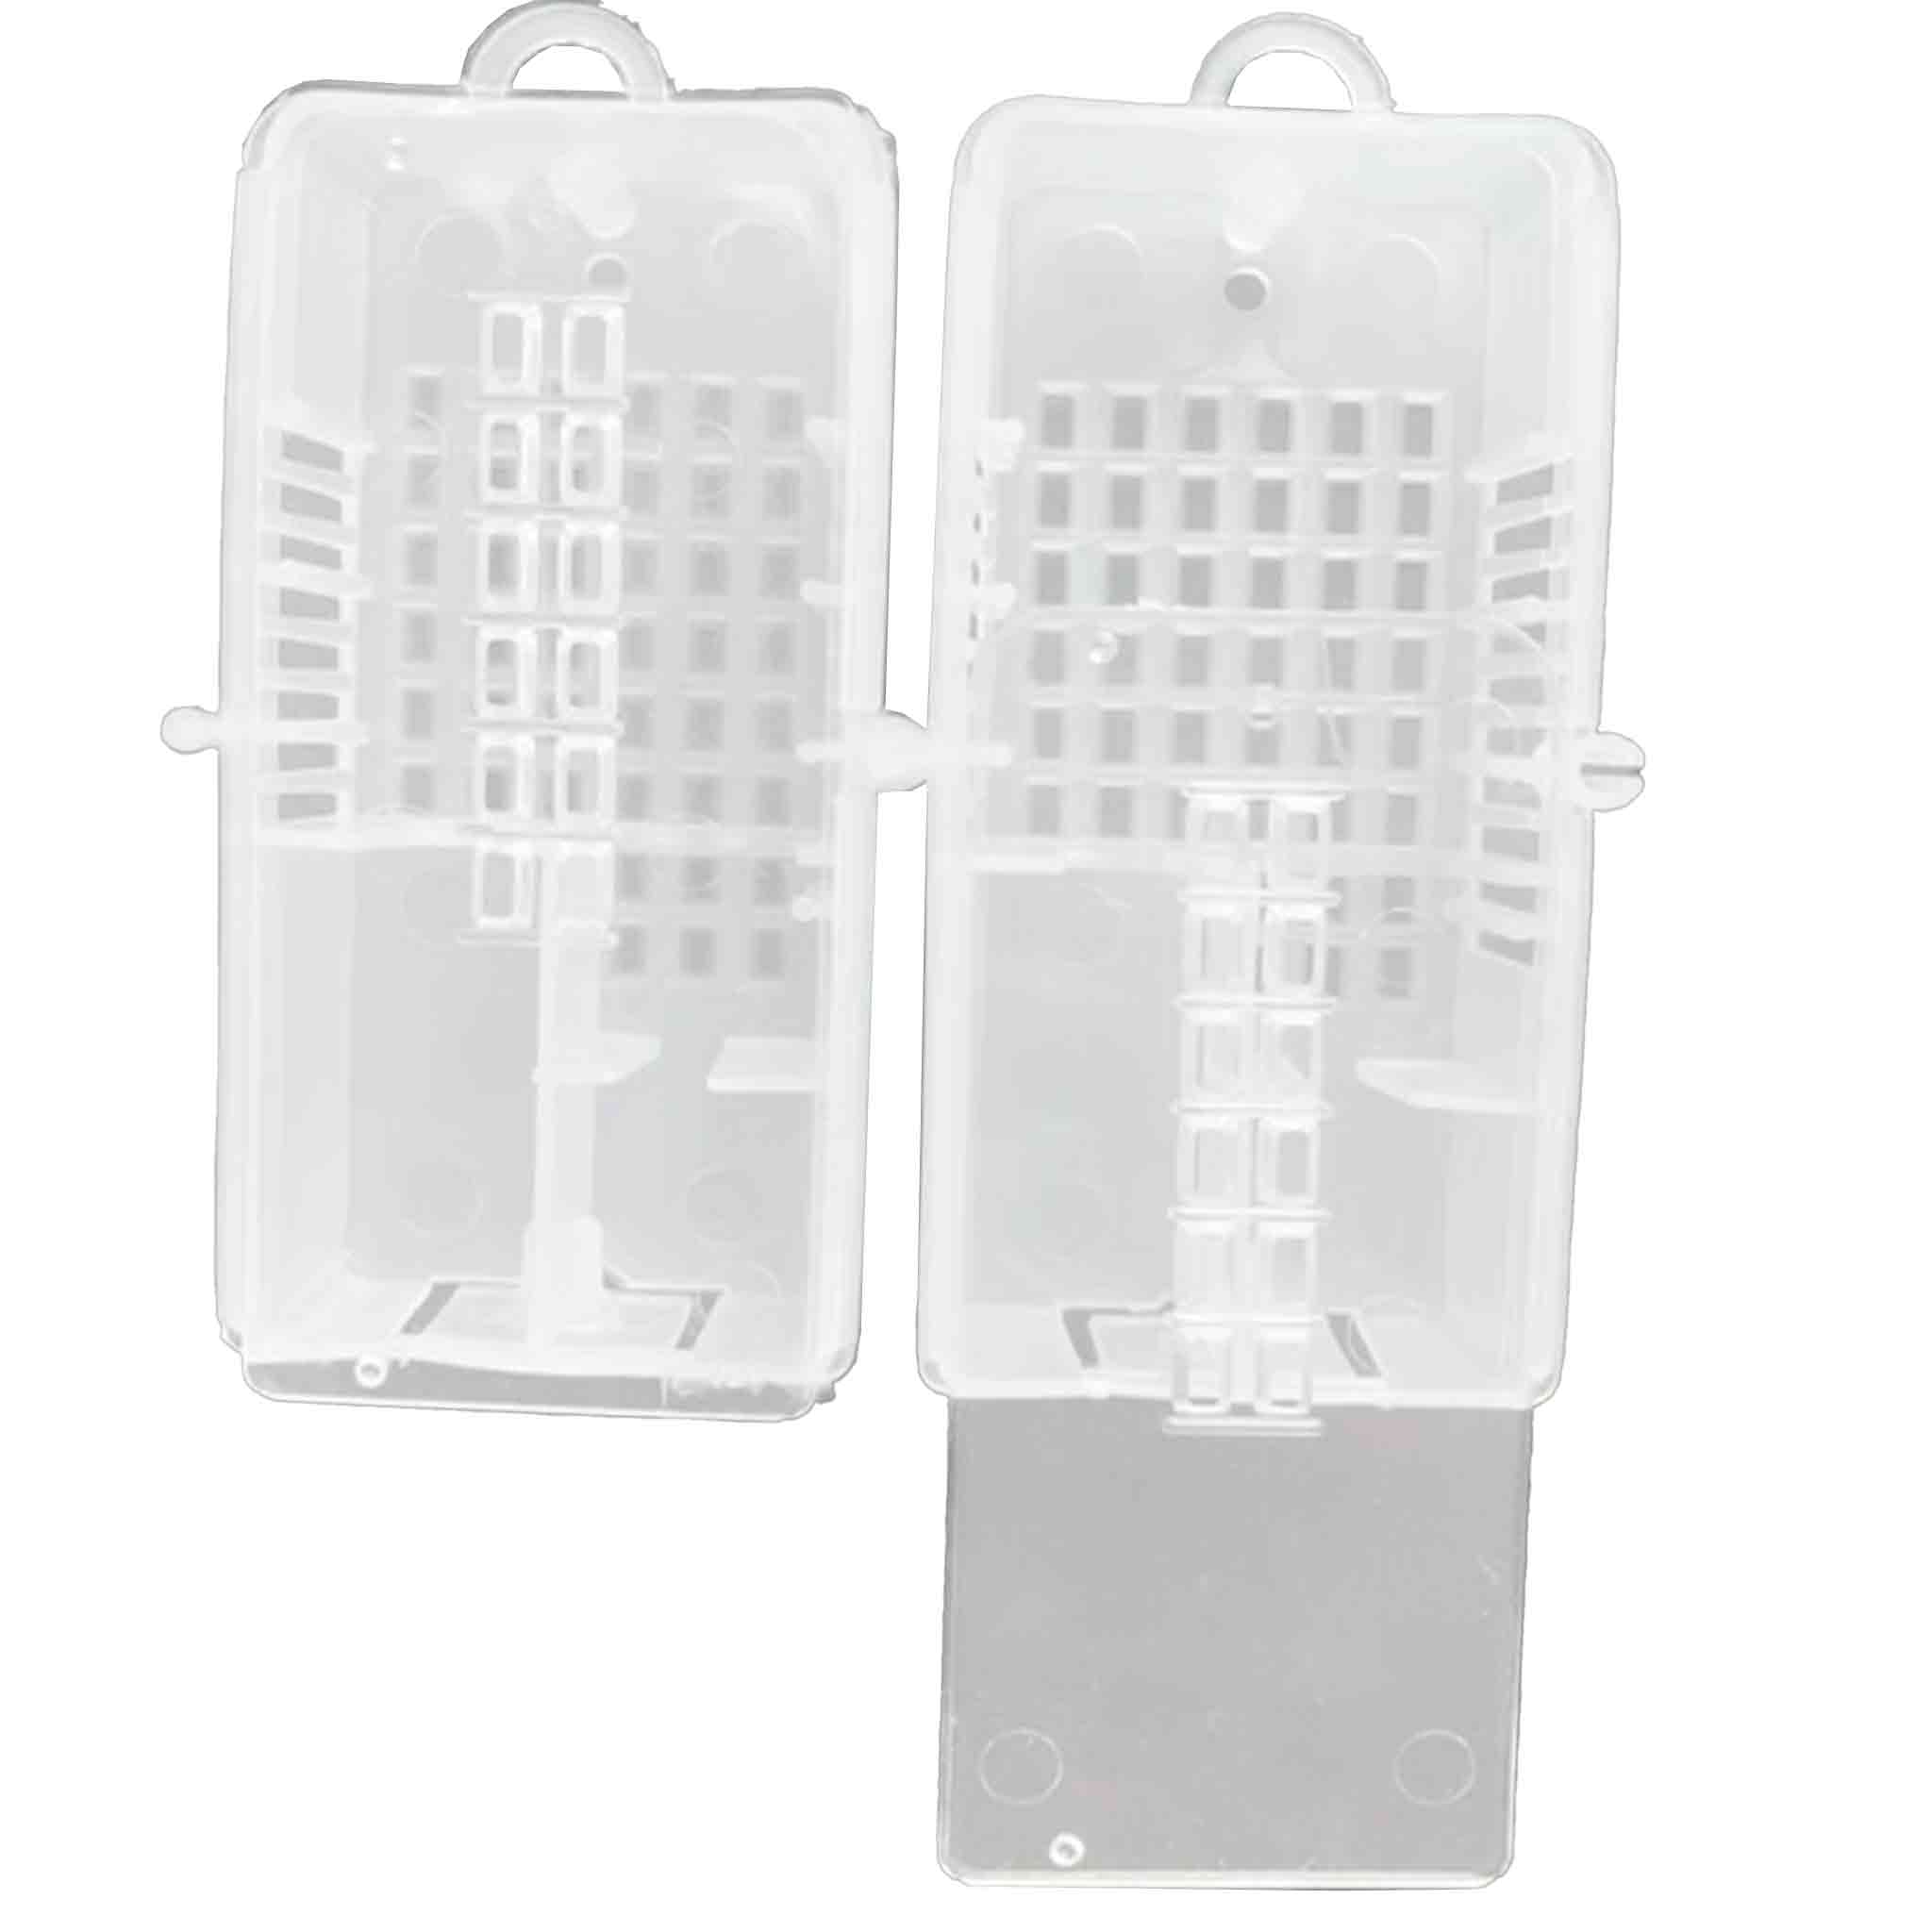 Large Queen Bee Cages with Clear Feeding Area - Queen collection by Buzzbee Beekeeping Supplies